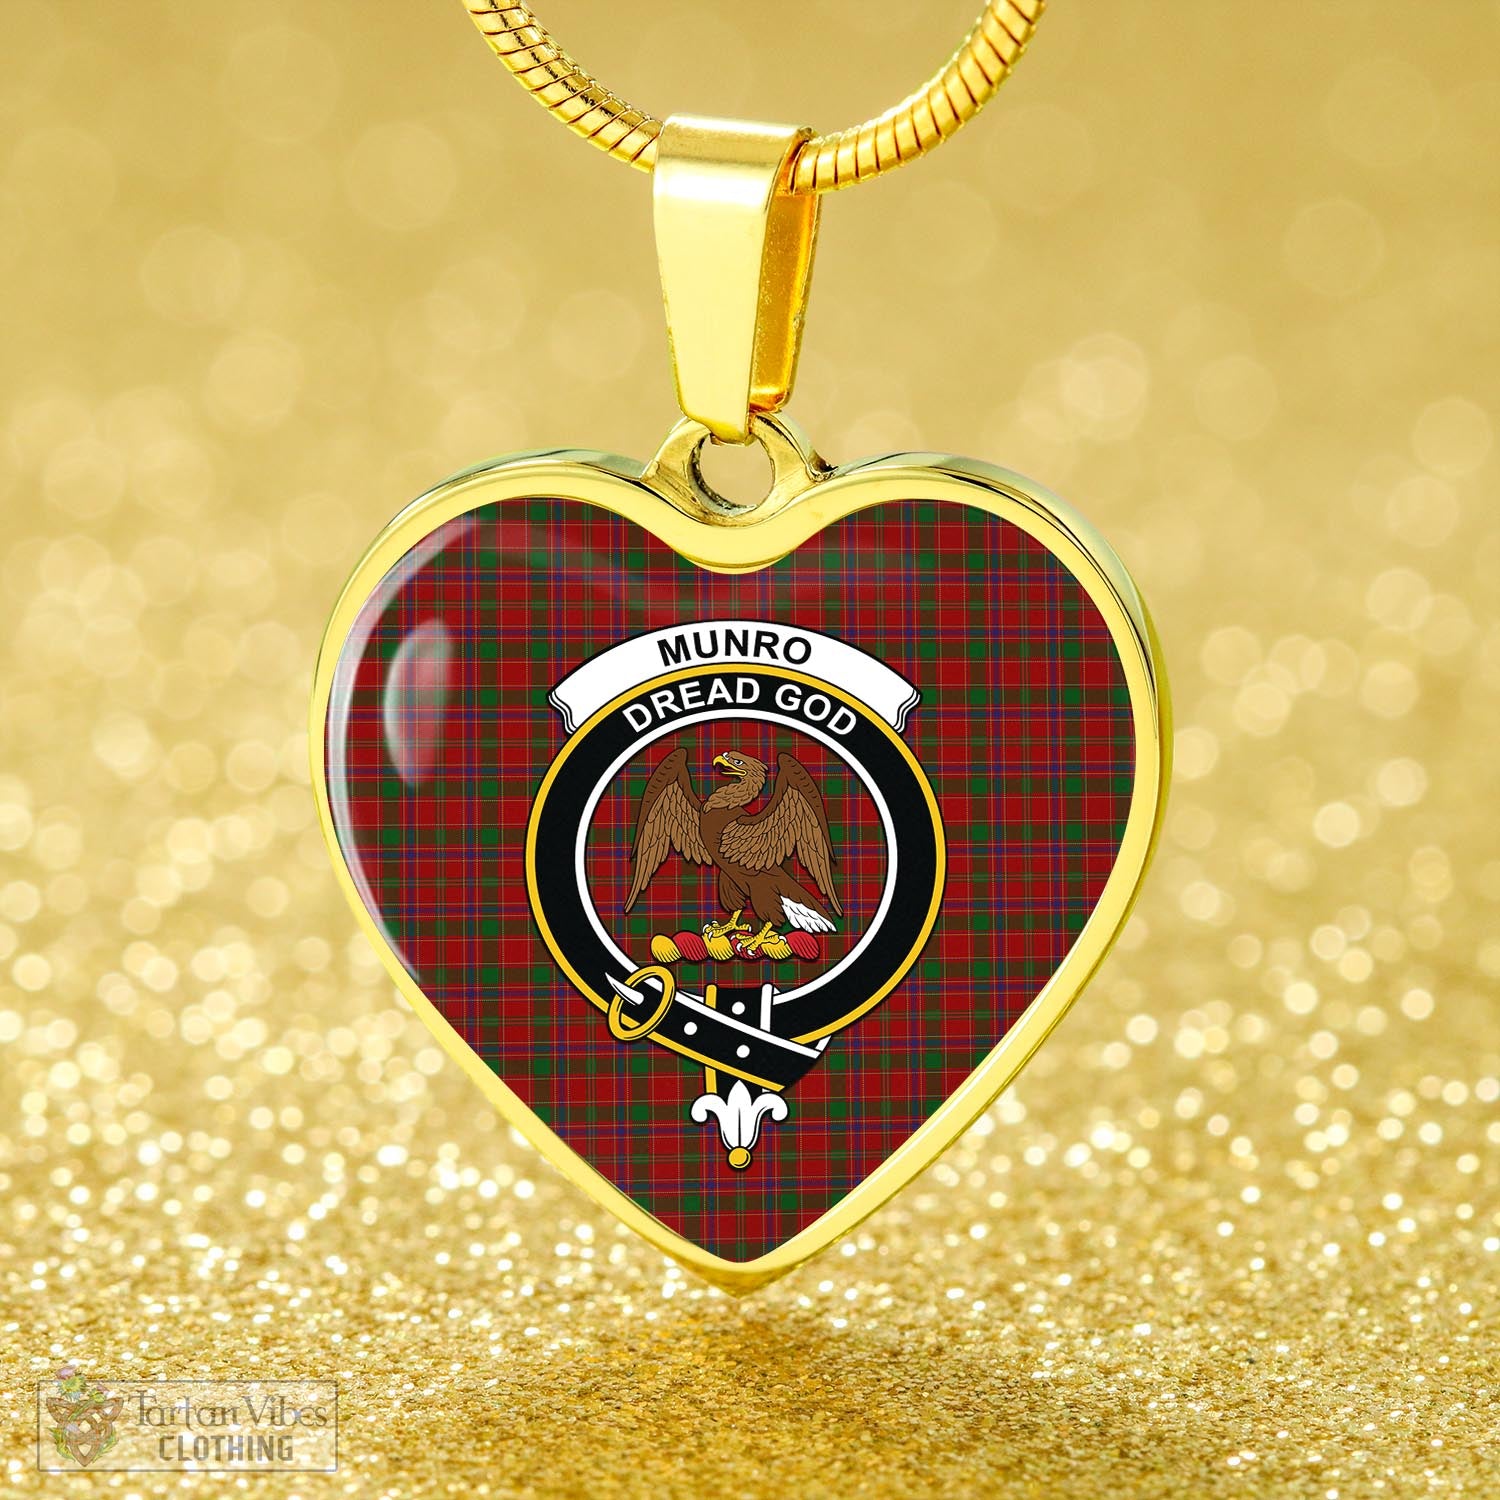 Tartan Vibes Clothing Munro Tartan Heart Necklace with Family Crest